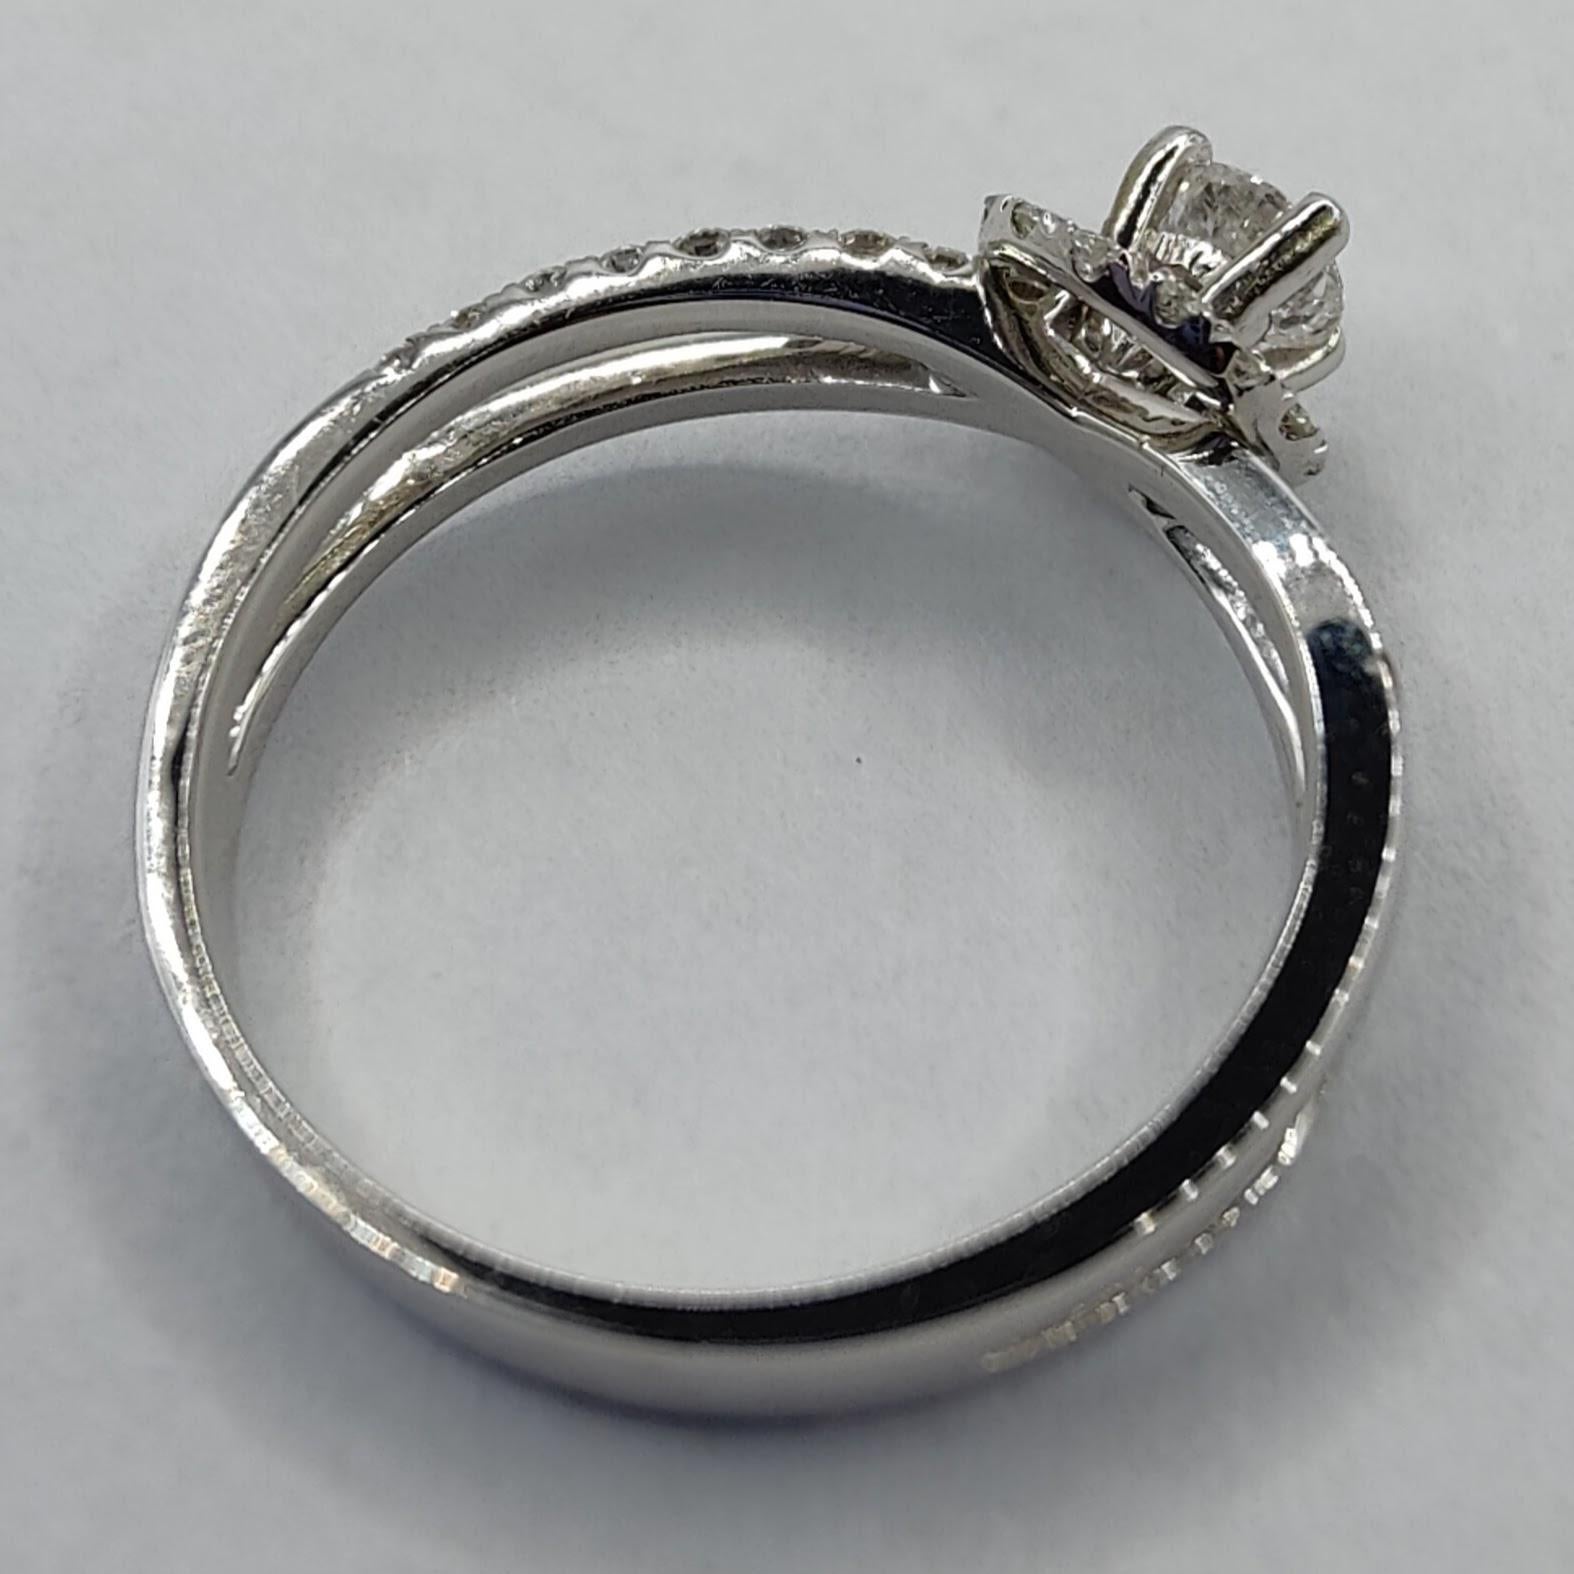 Hula Hoop .58 Carat Diamond Ring in 18K White Gold In New Condition For Sale In Wan Chai District, HK